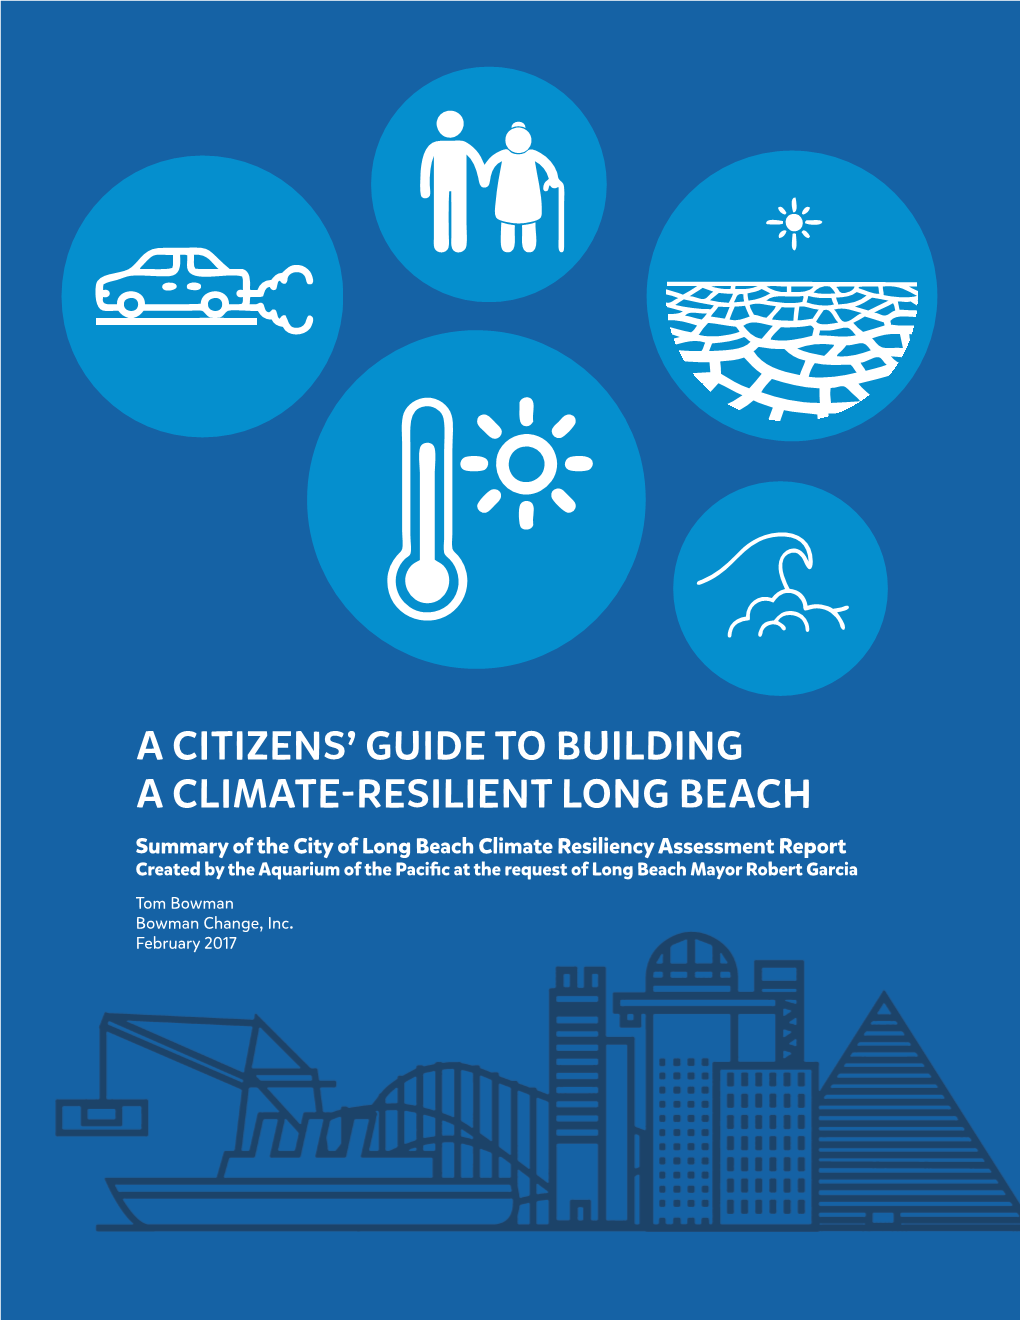 A Citizens' Guide to Building a Climate-Resilient Long Beach